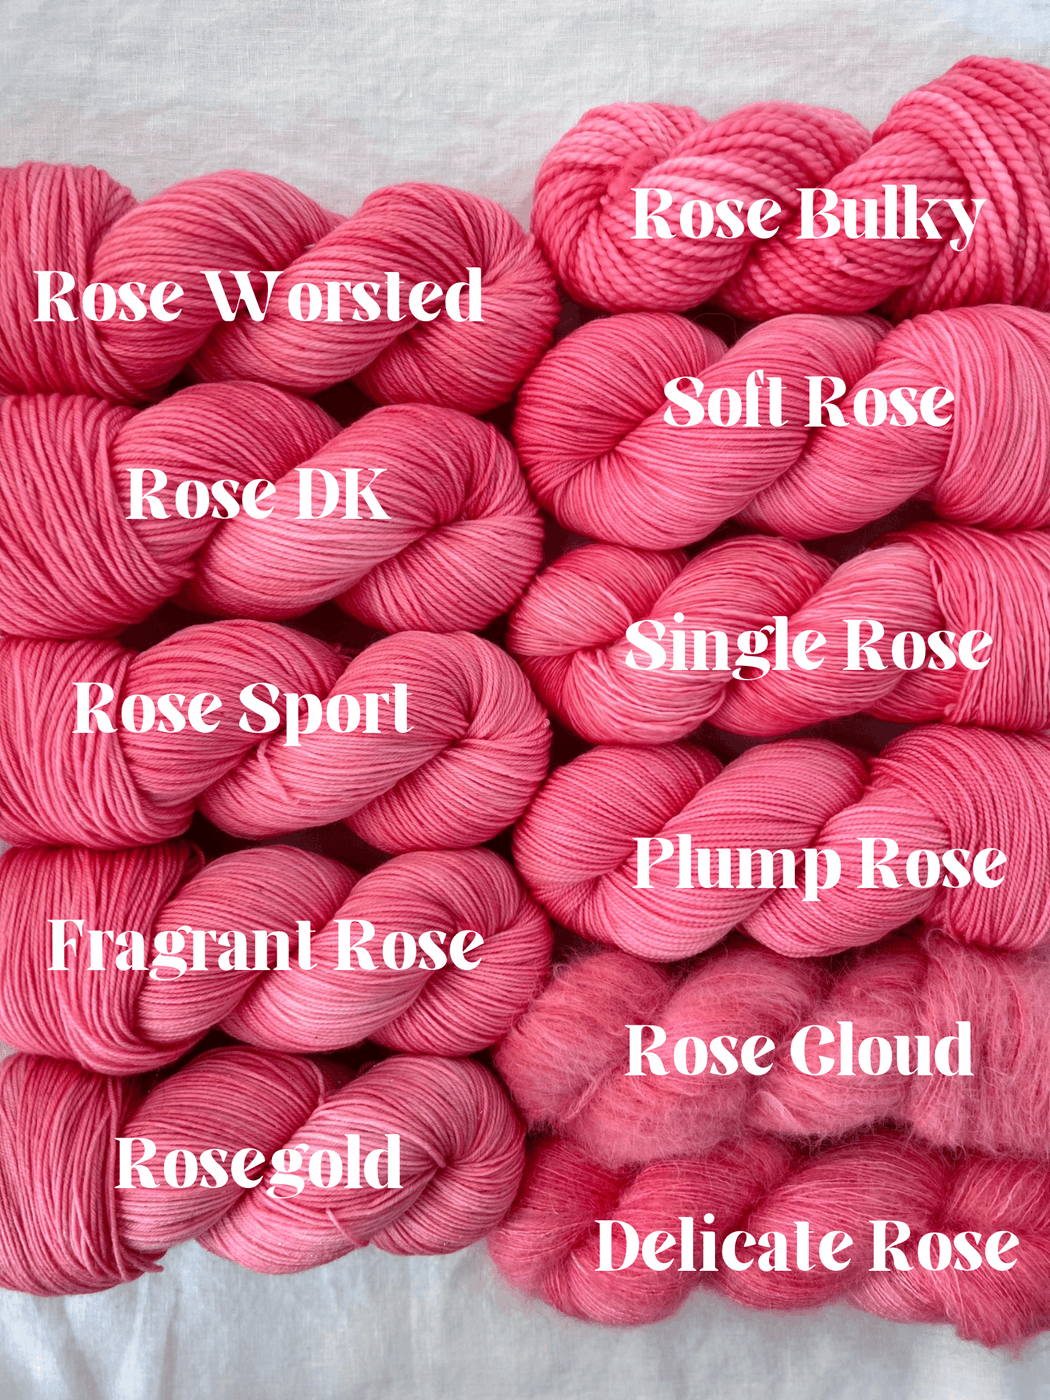 Anemone - Ruby and Roses Yarn - Hand Dyed Yarn